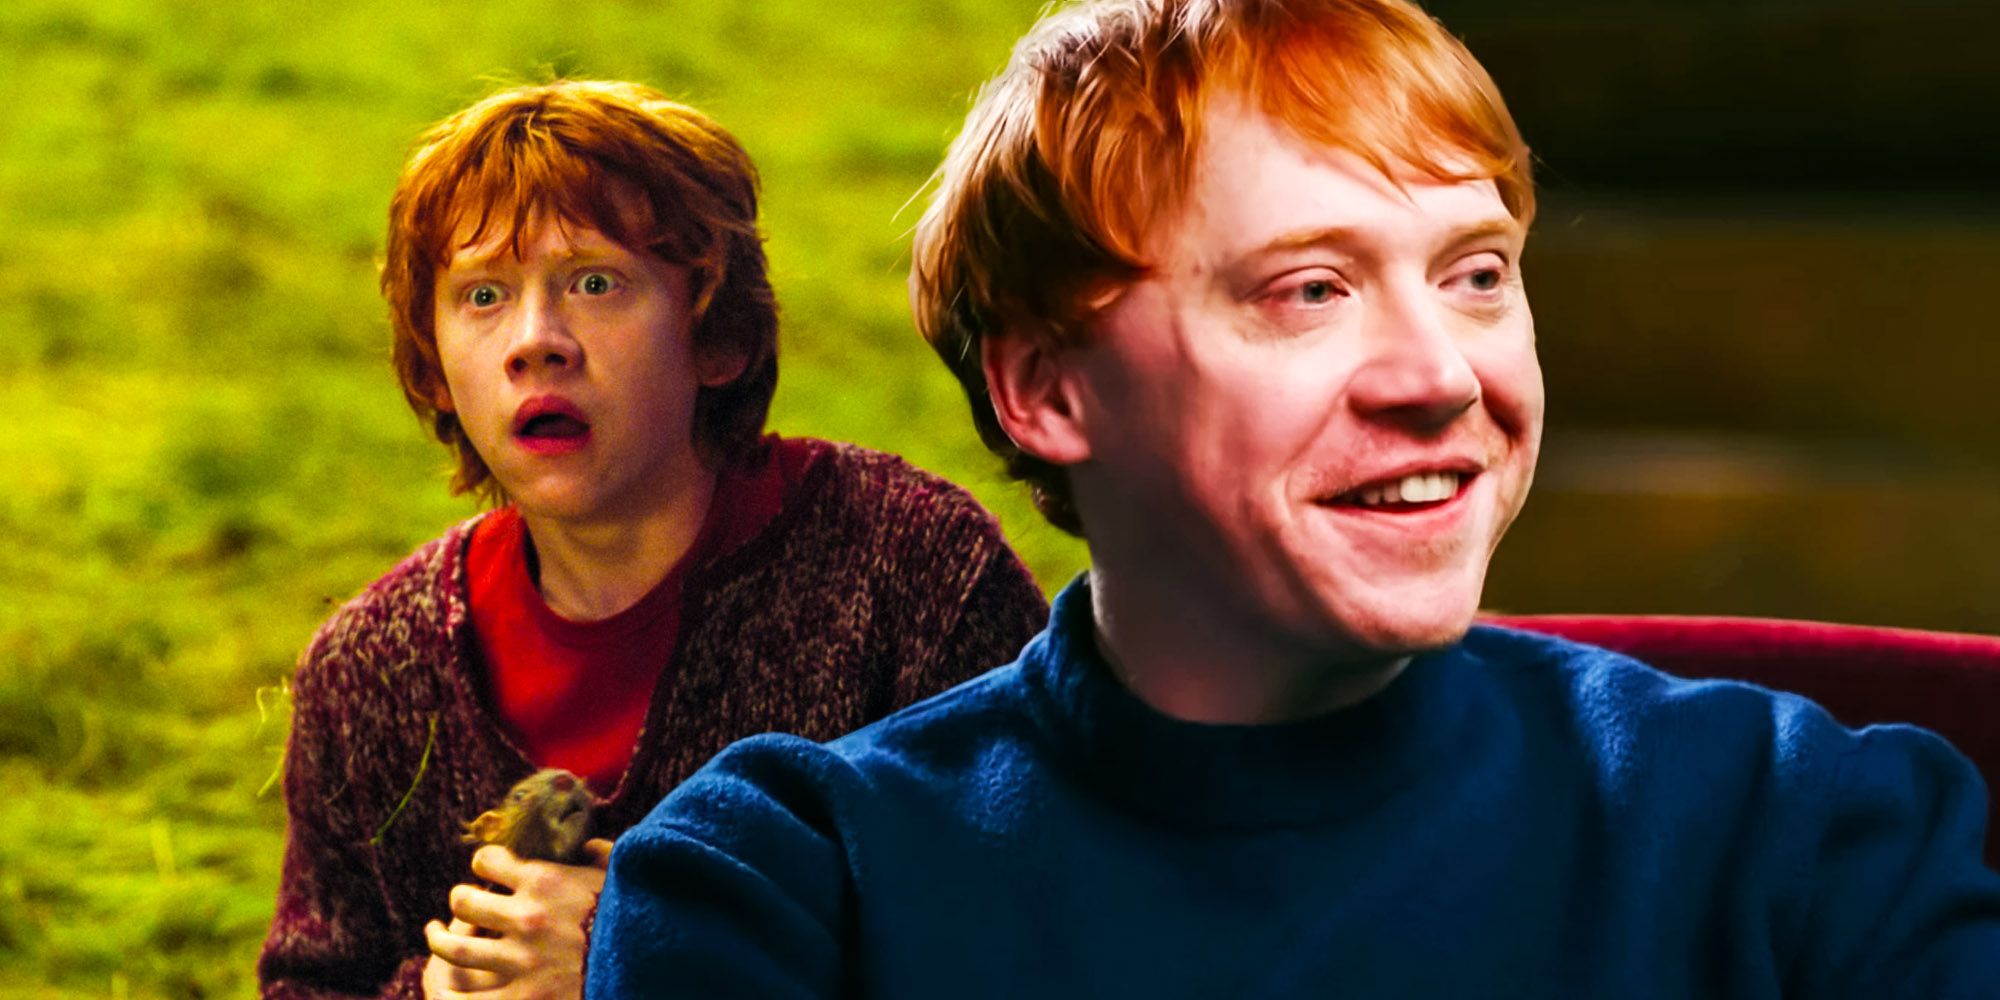 Harry potter return to hogwarts shows why Rupert Grint was the perfect Ron Weasley